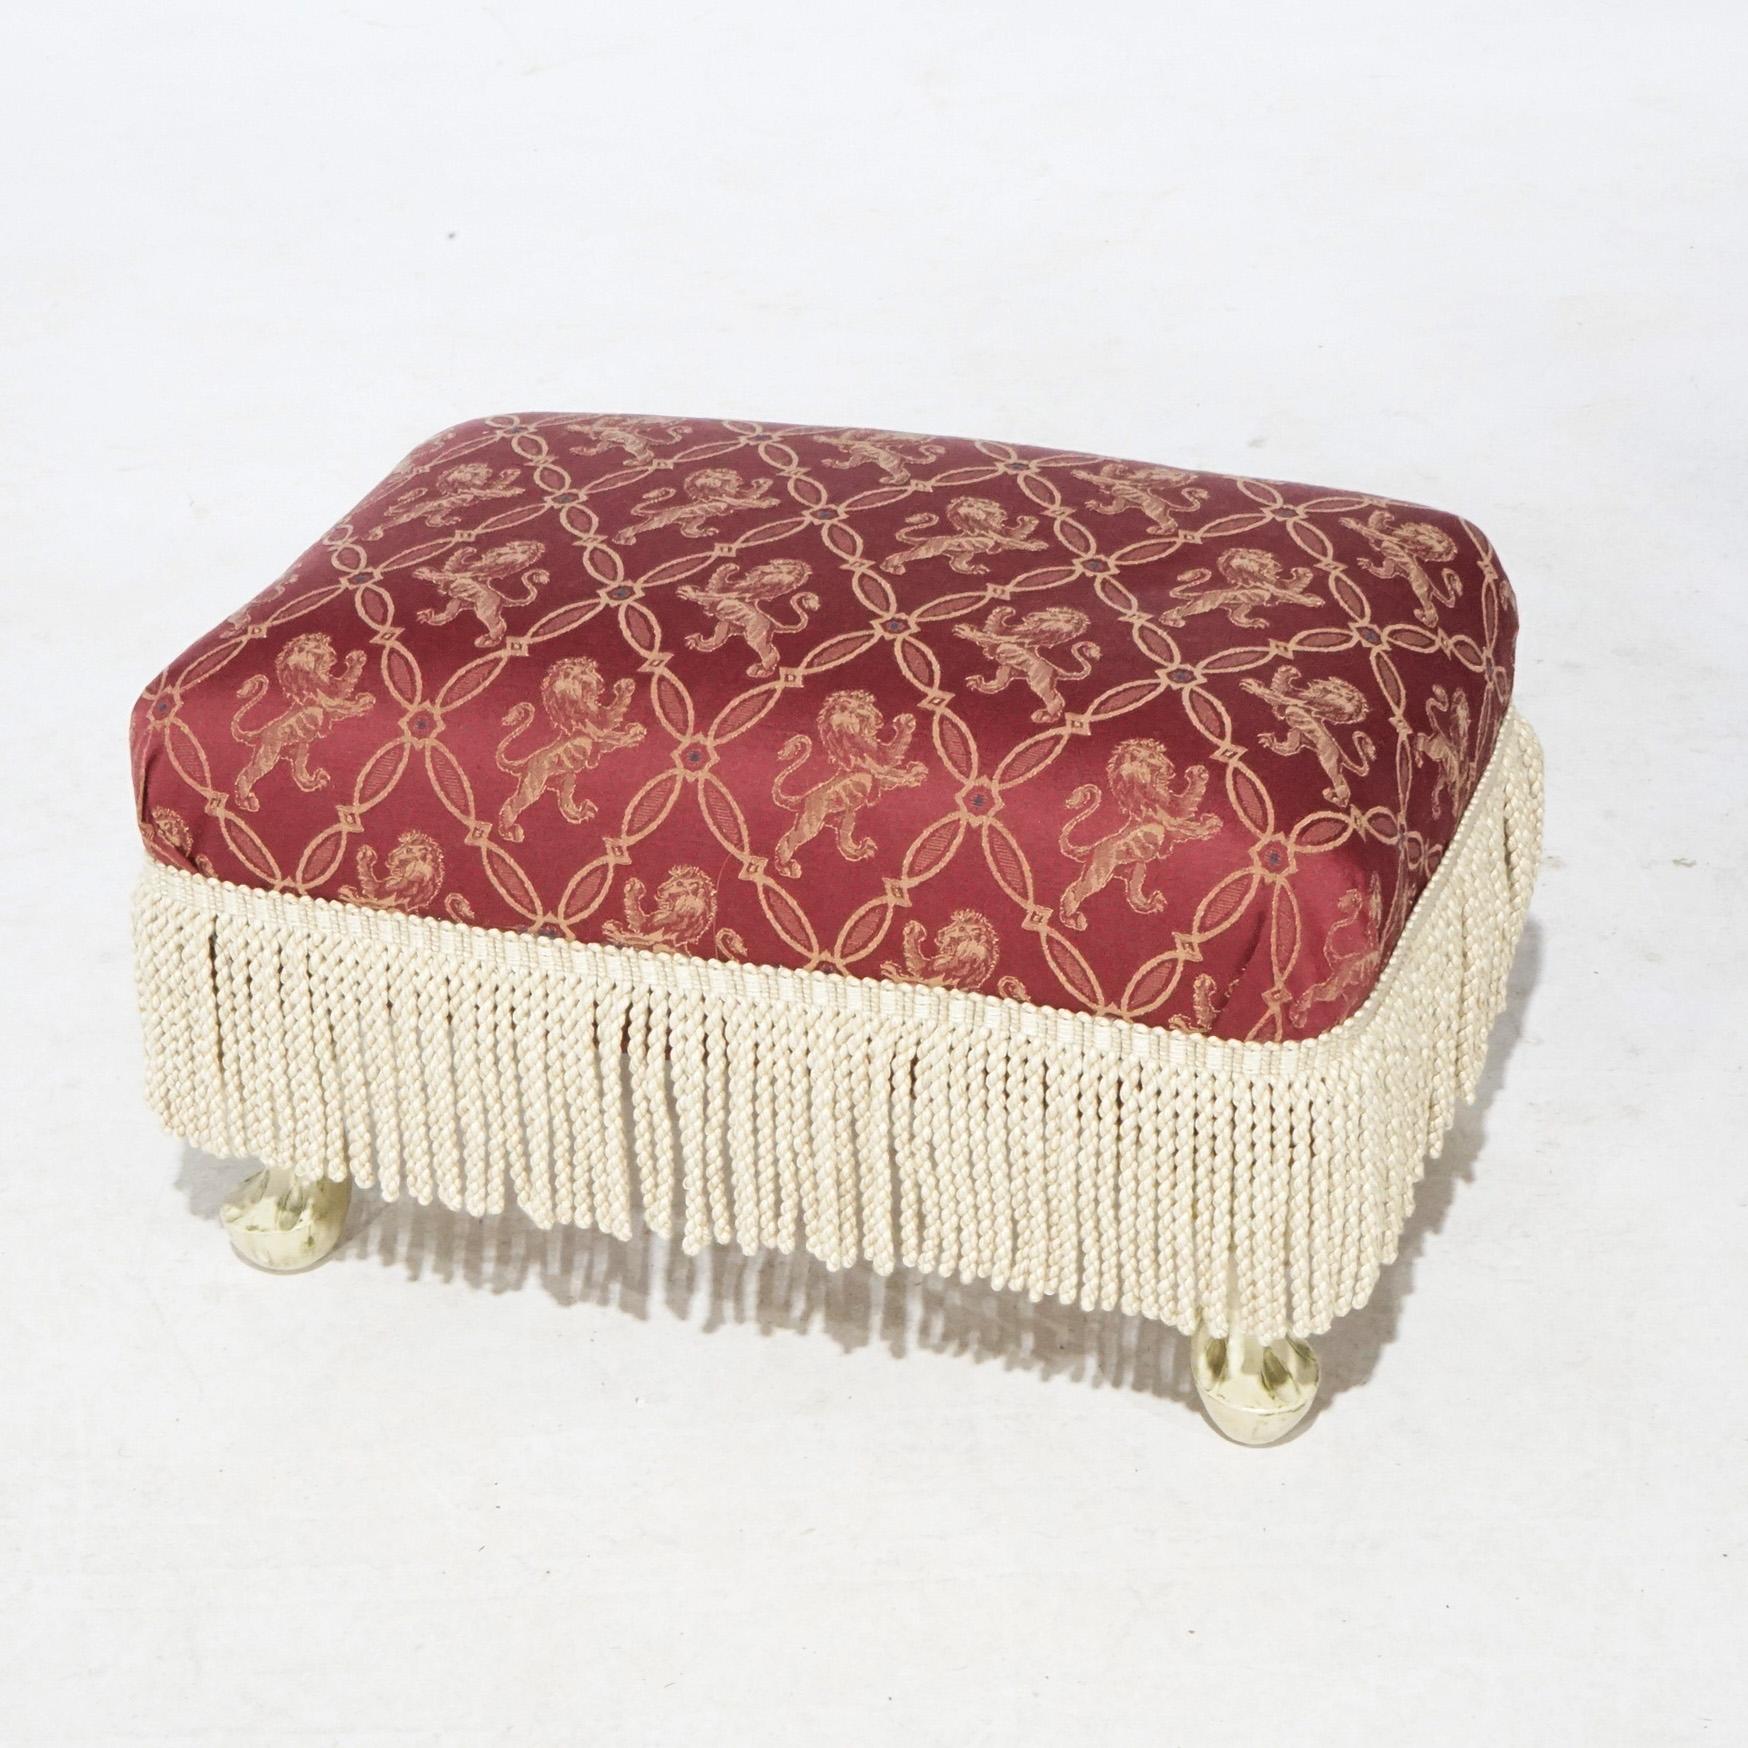 An antique French Country style footstool offers upholstered seat with near-floor length fringe surround and raised on foliate carved and painted legs, circa 1920.

Measures- 12.5''H x 21.5''W x 15''D.